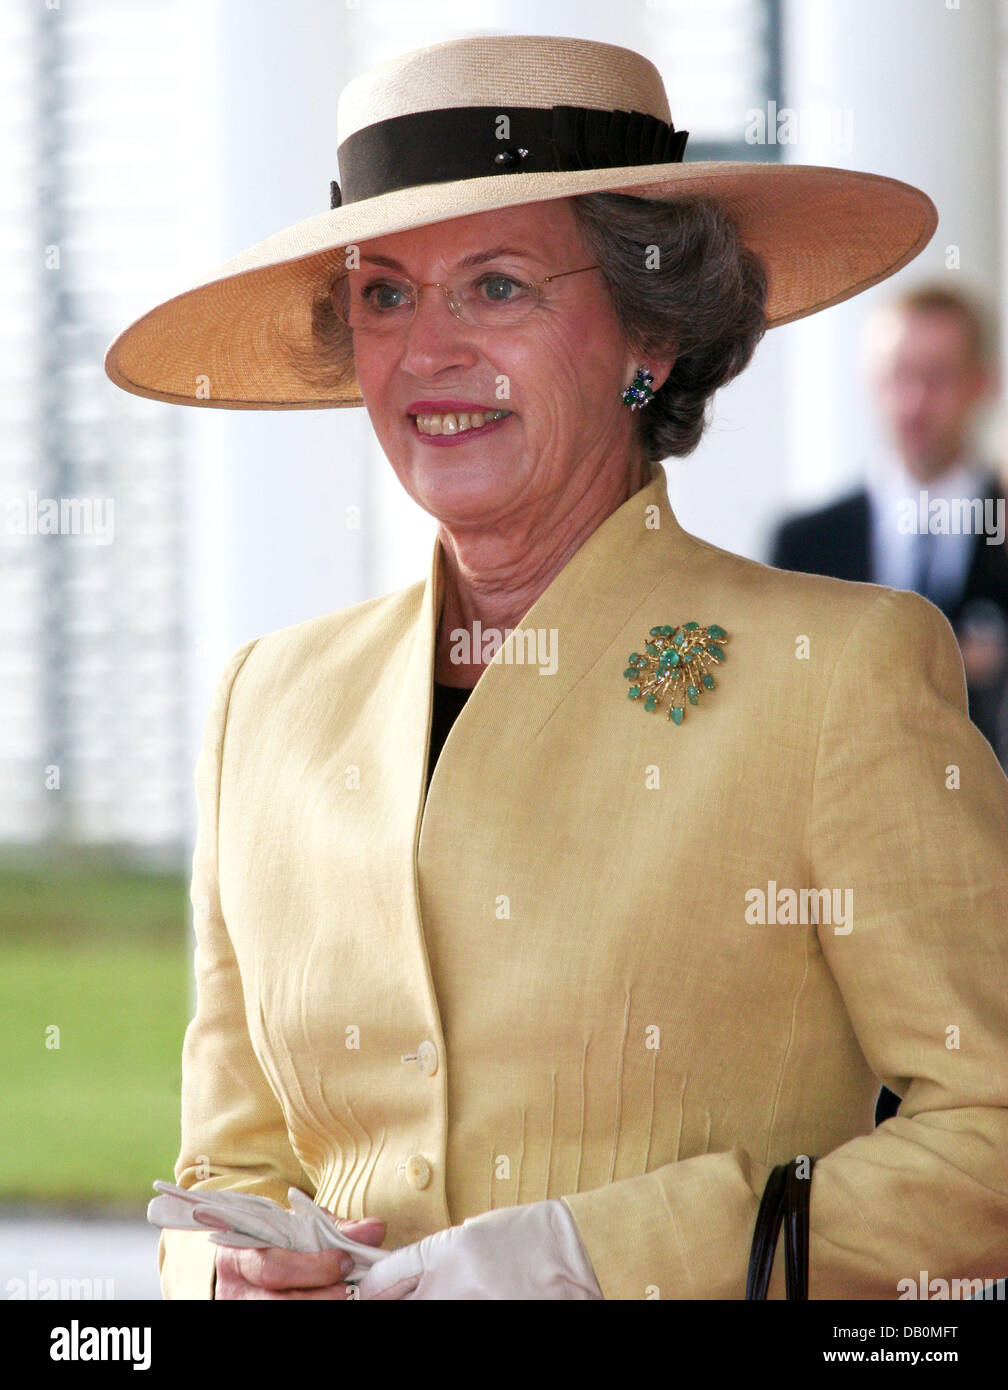 princess-benedikte-of-denmark-is-pictured-prior-to-the-arrival-of-DB0MFT.jpg